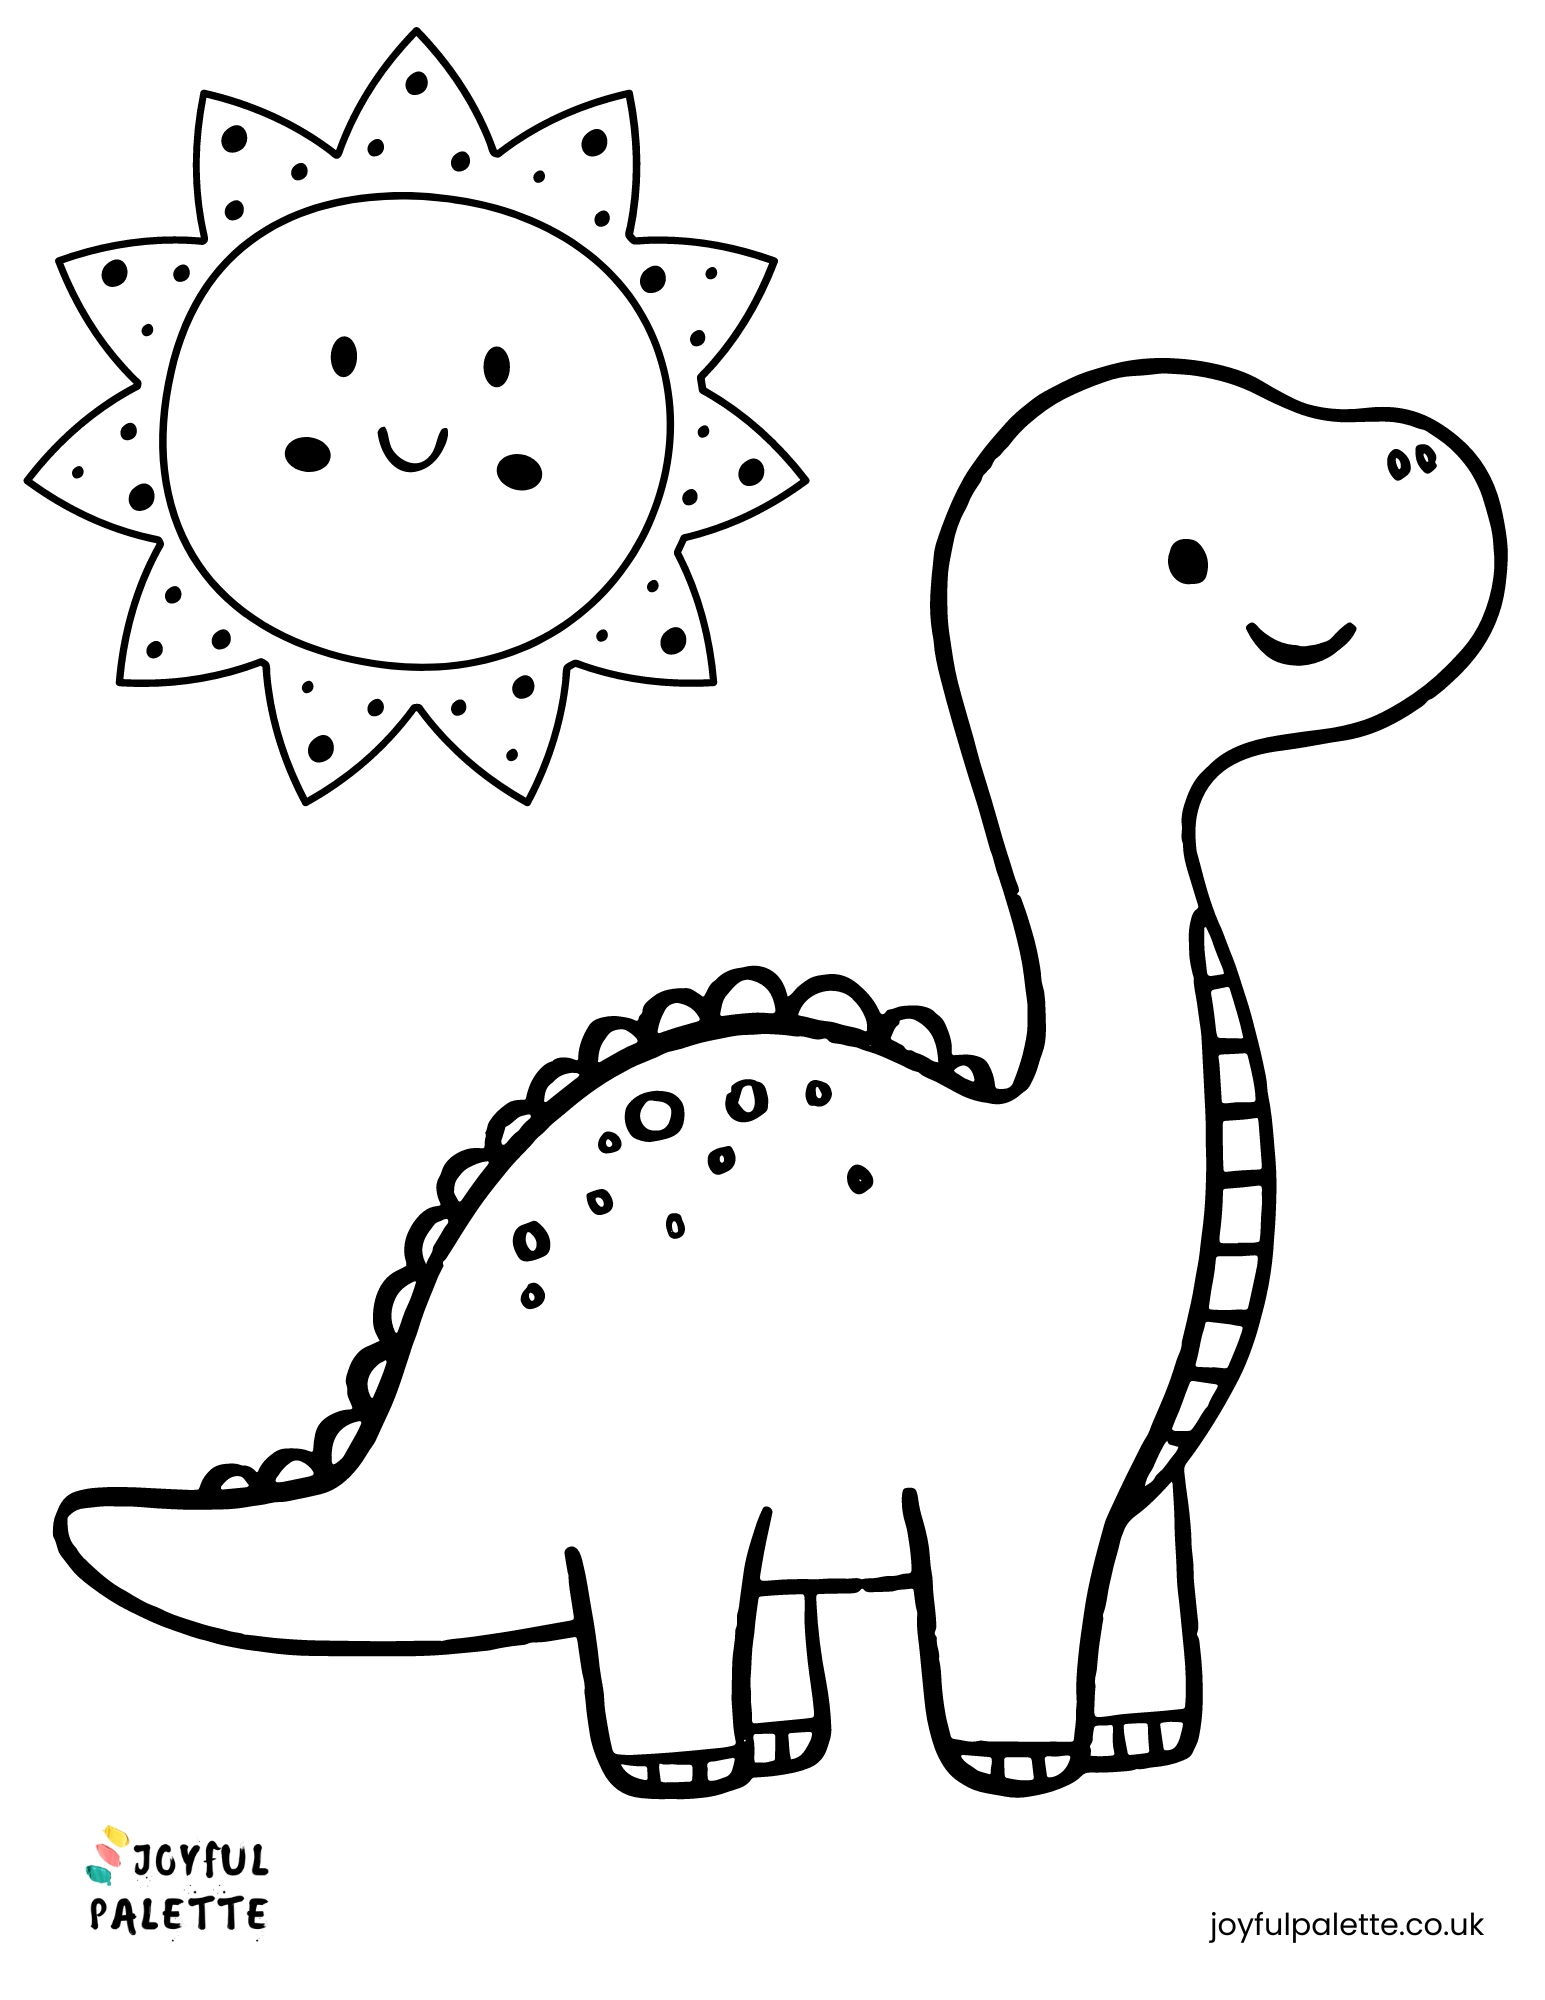 Easy Dinosaur Colouring Page